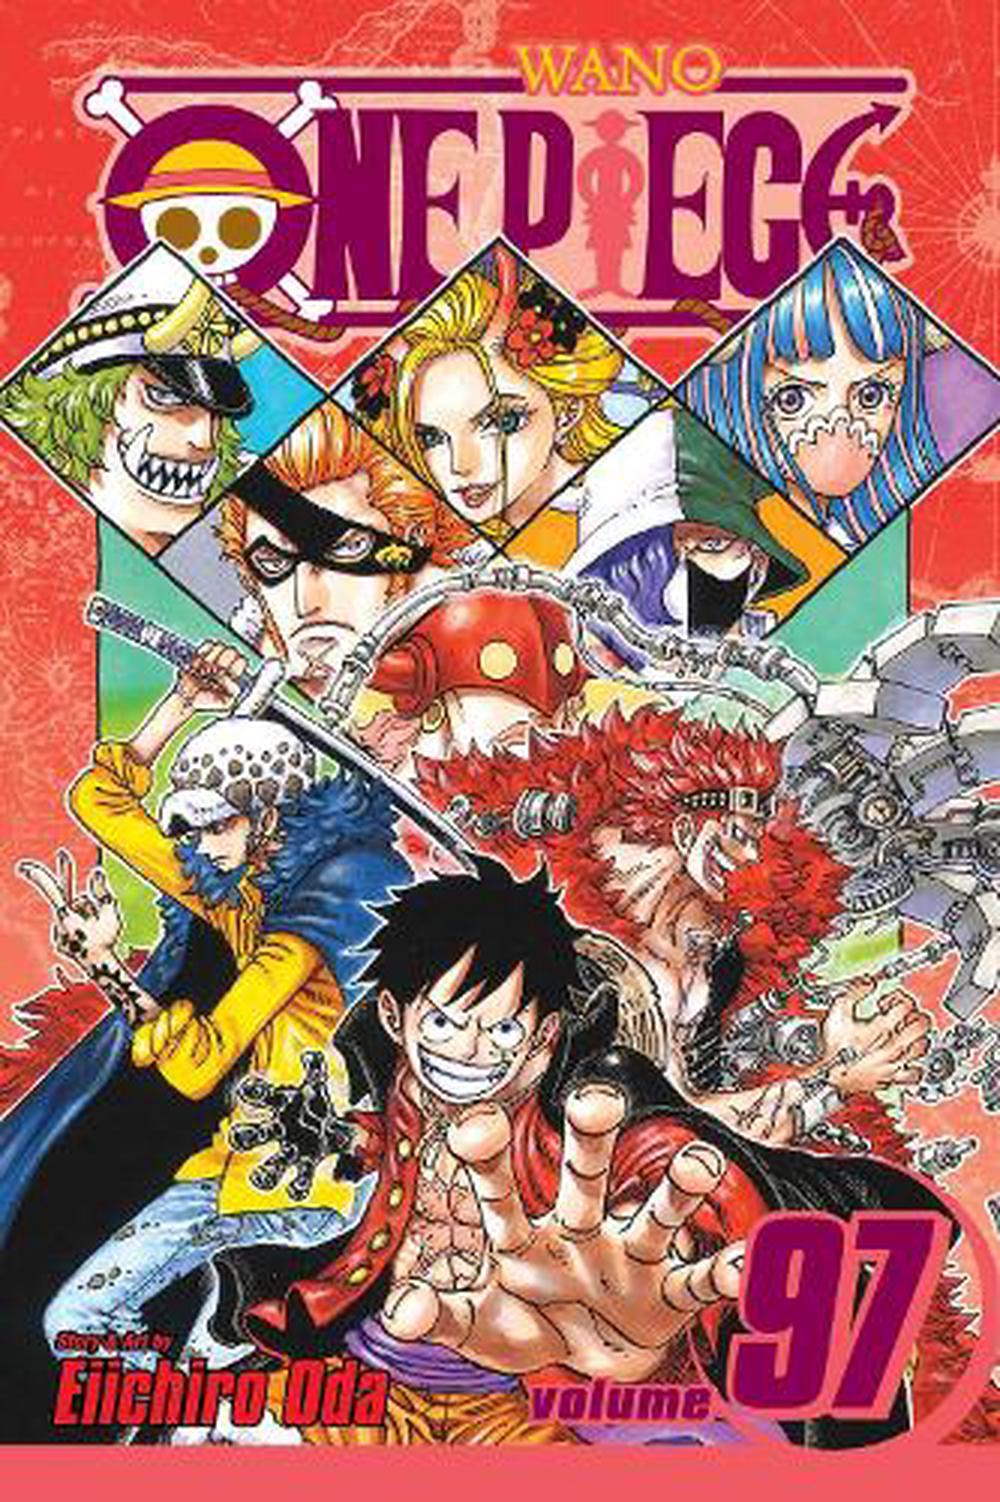 One Piece Vol 97 By Eiichiro Oda Paperback Buy Online At The Nile